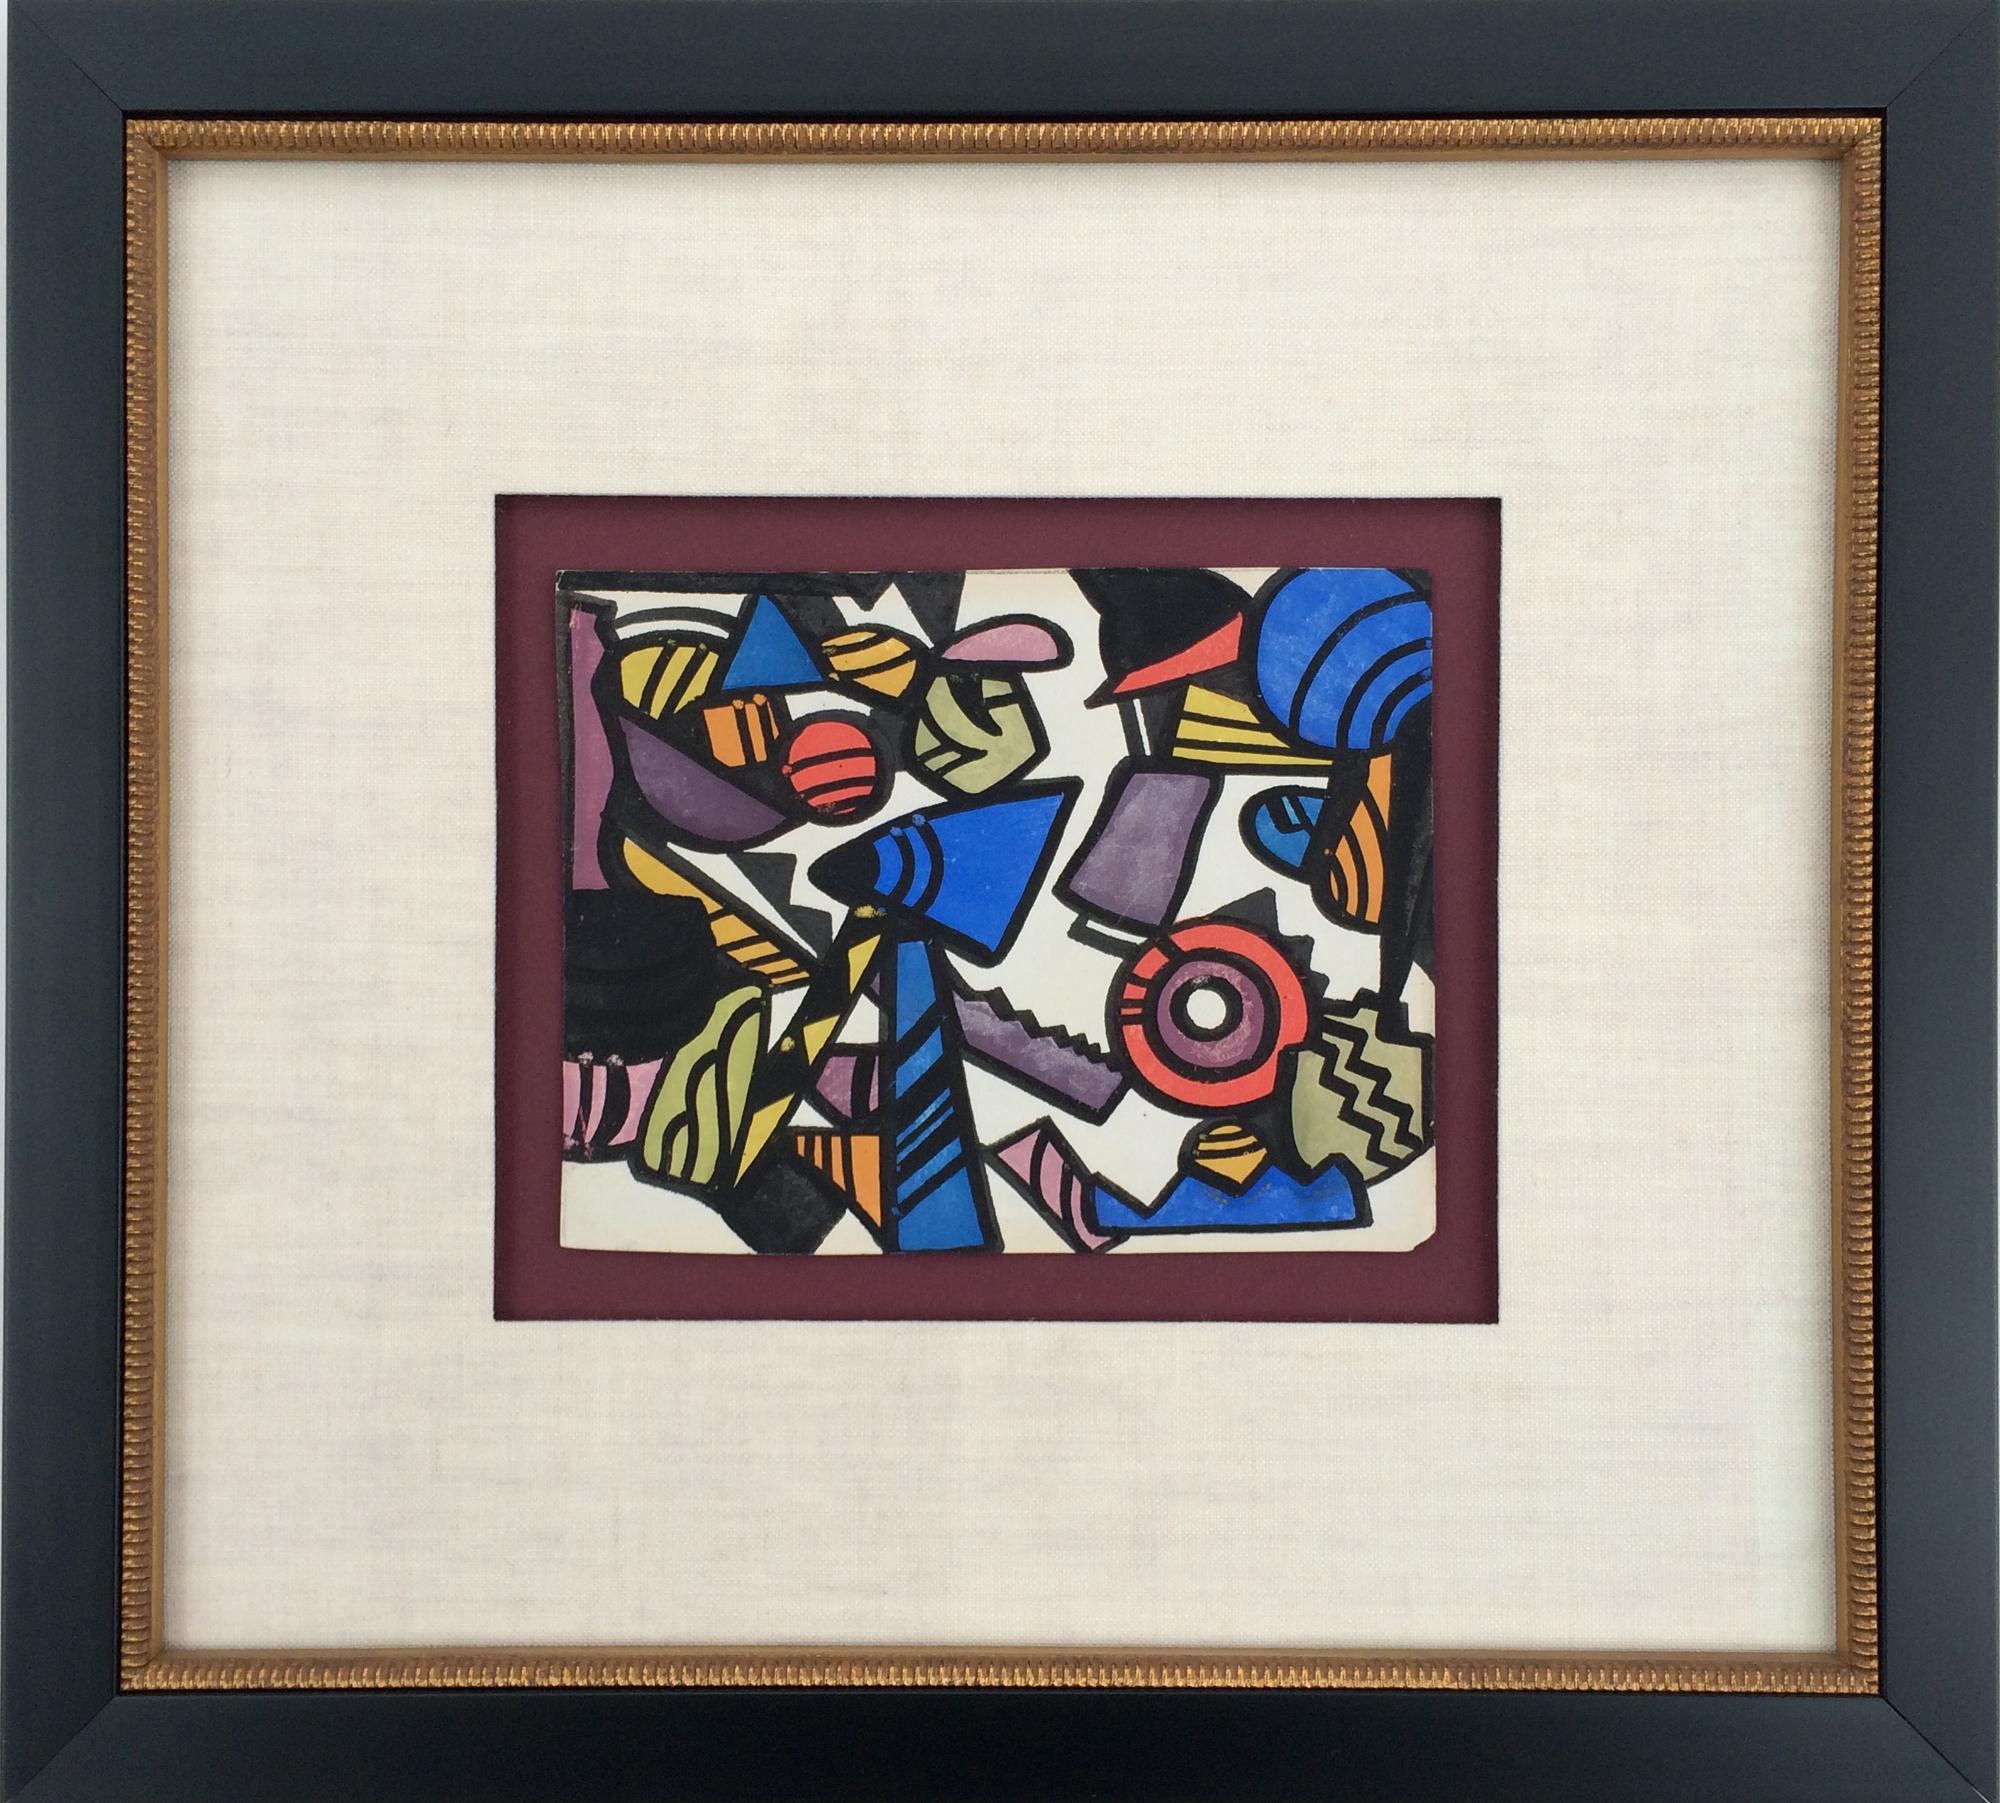 Jay Van Everen was a pioneering early American abstractionist known for his affiliation with the Synchromists. His abstract color studies would take him to the forefront of the American avant-garde. The artist created a custom set of hand-made